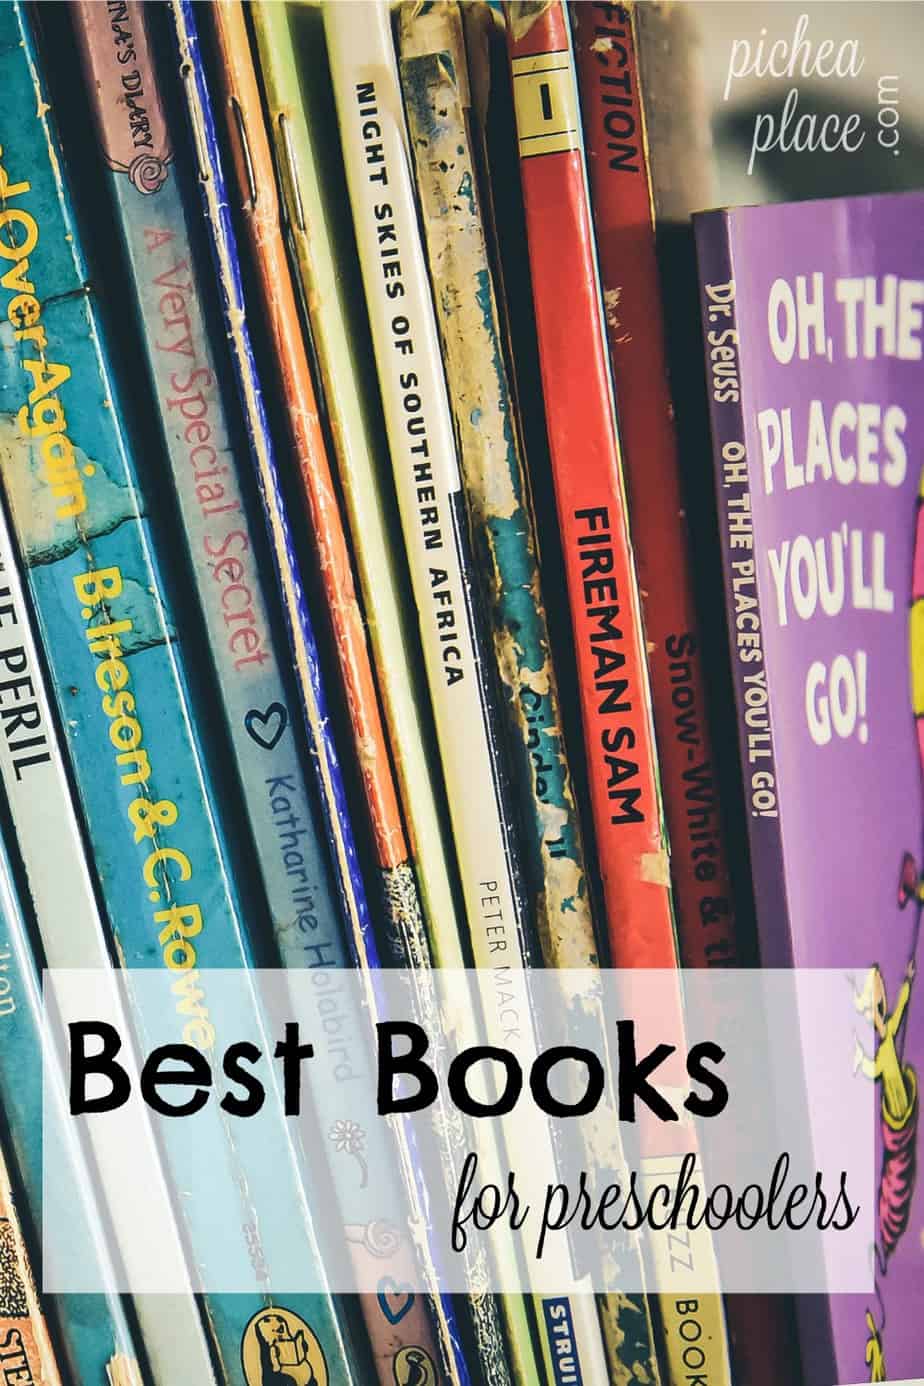 Best Books for Kids | themed lists of books for kids of all ages